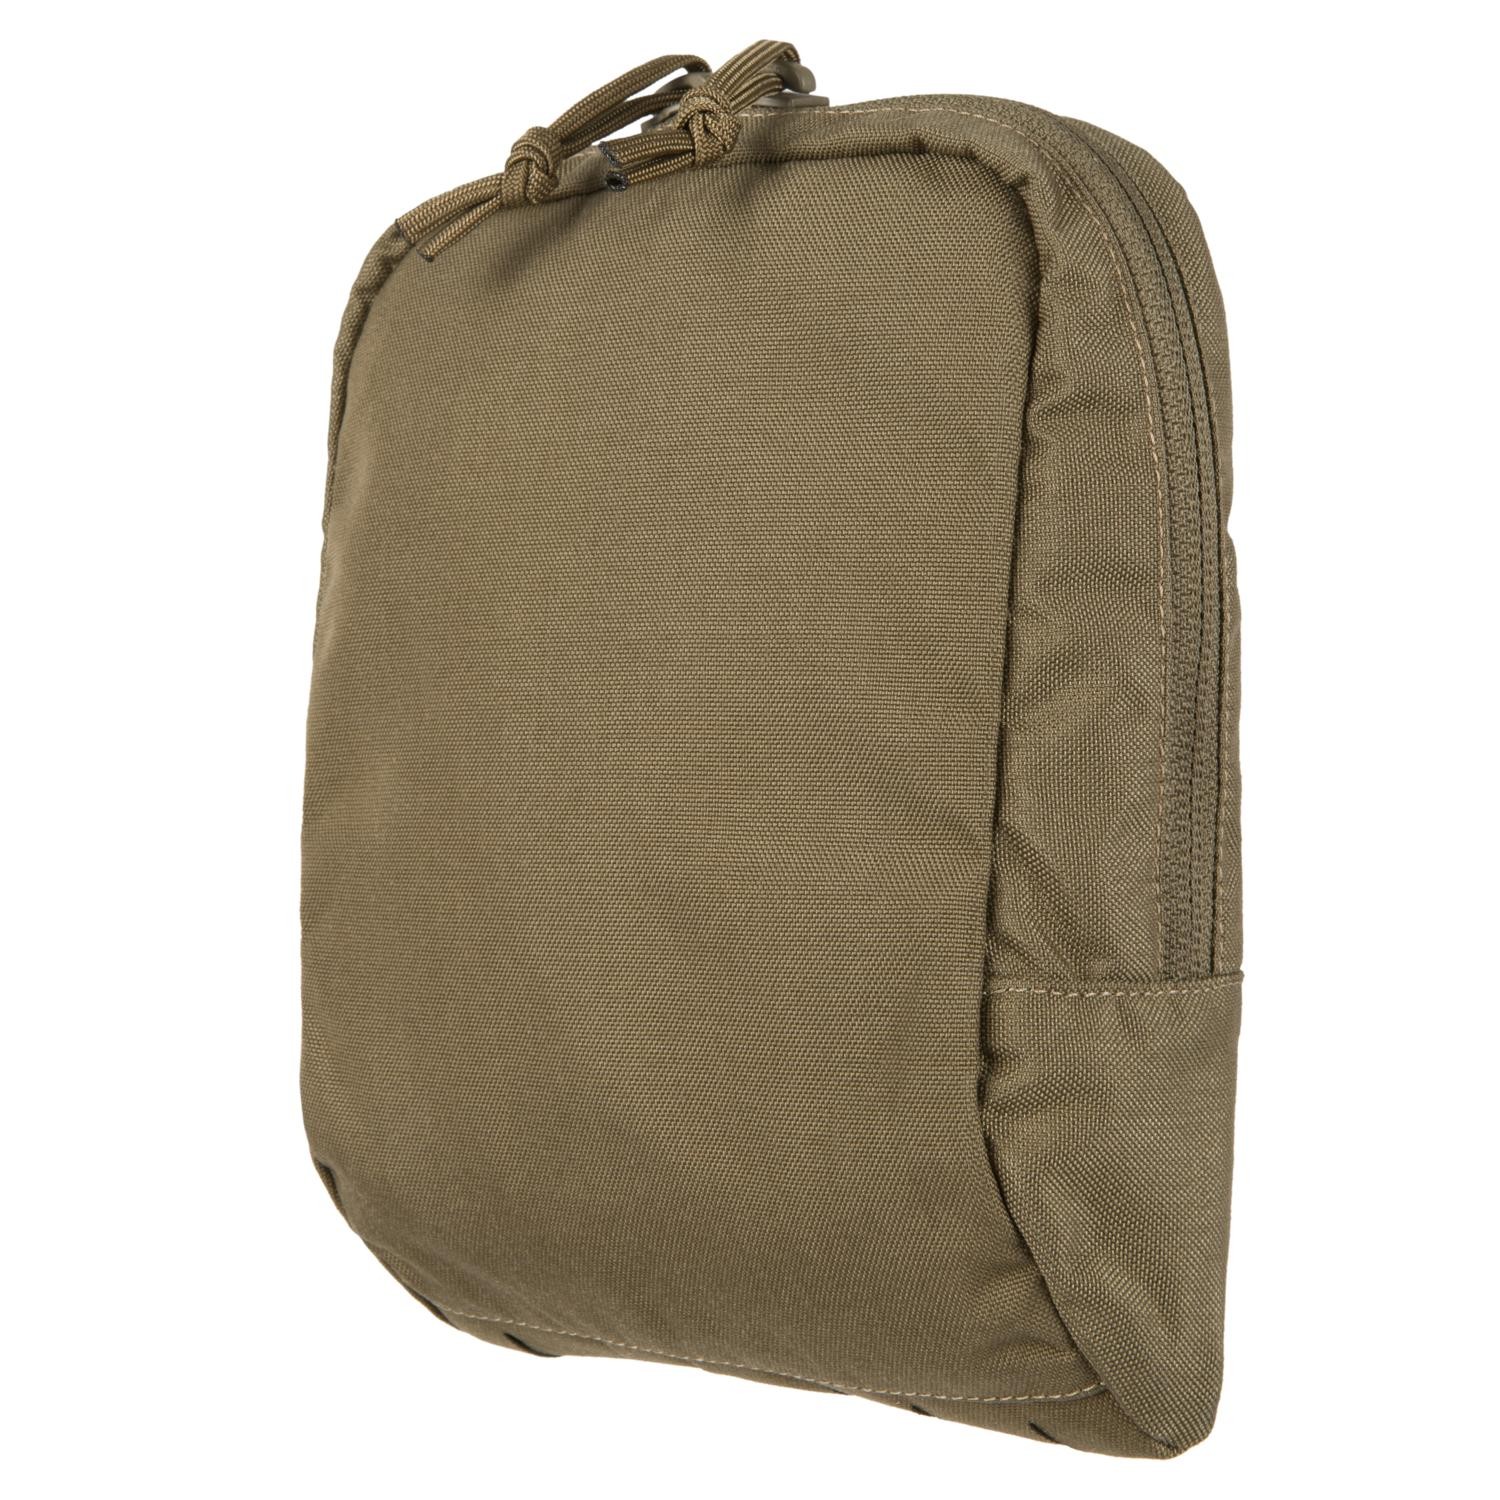 UTILITY POUCH LARGE - DIRECT ACTION